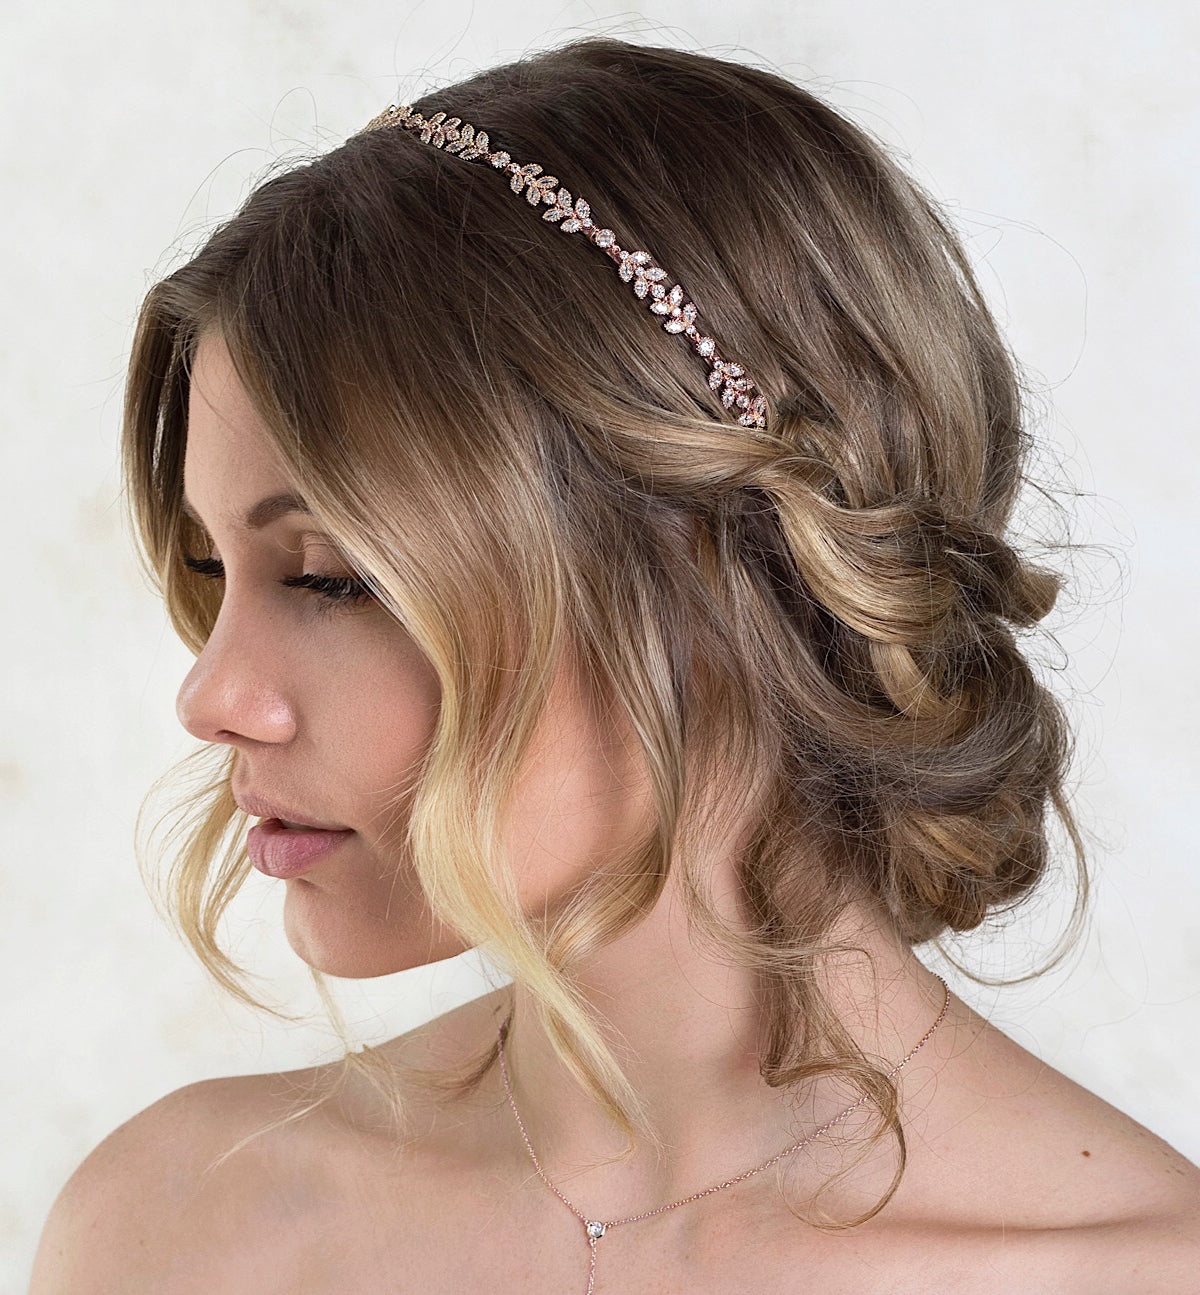 Monet Floral Headpiece with Ribbon Tie - Amy O. Bridal